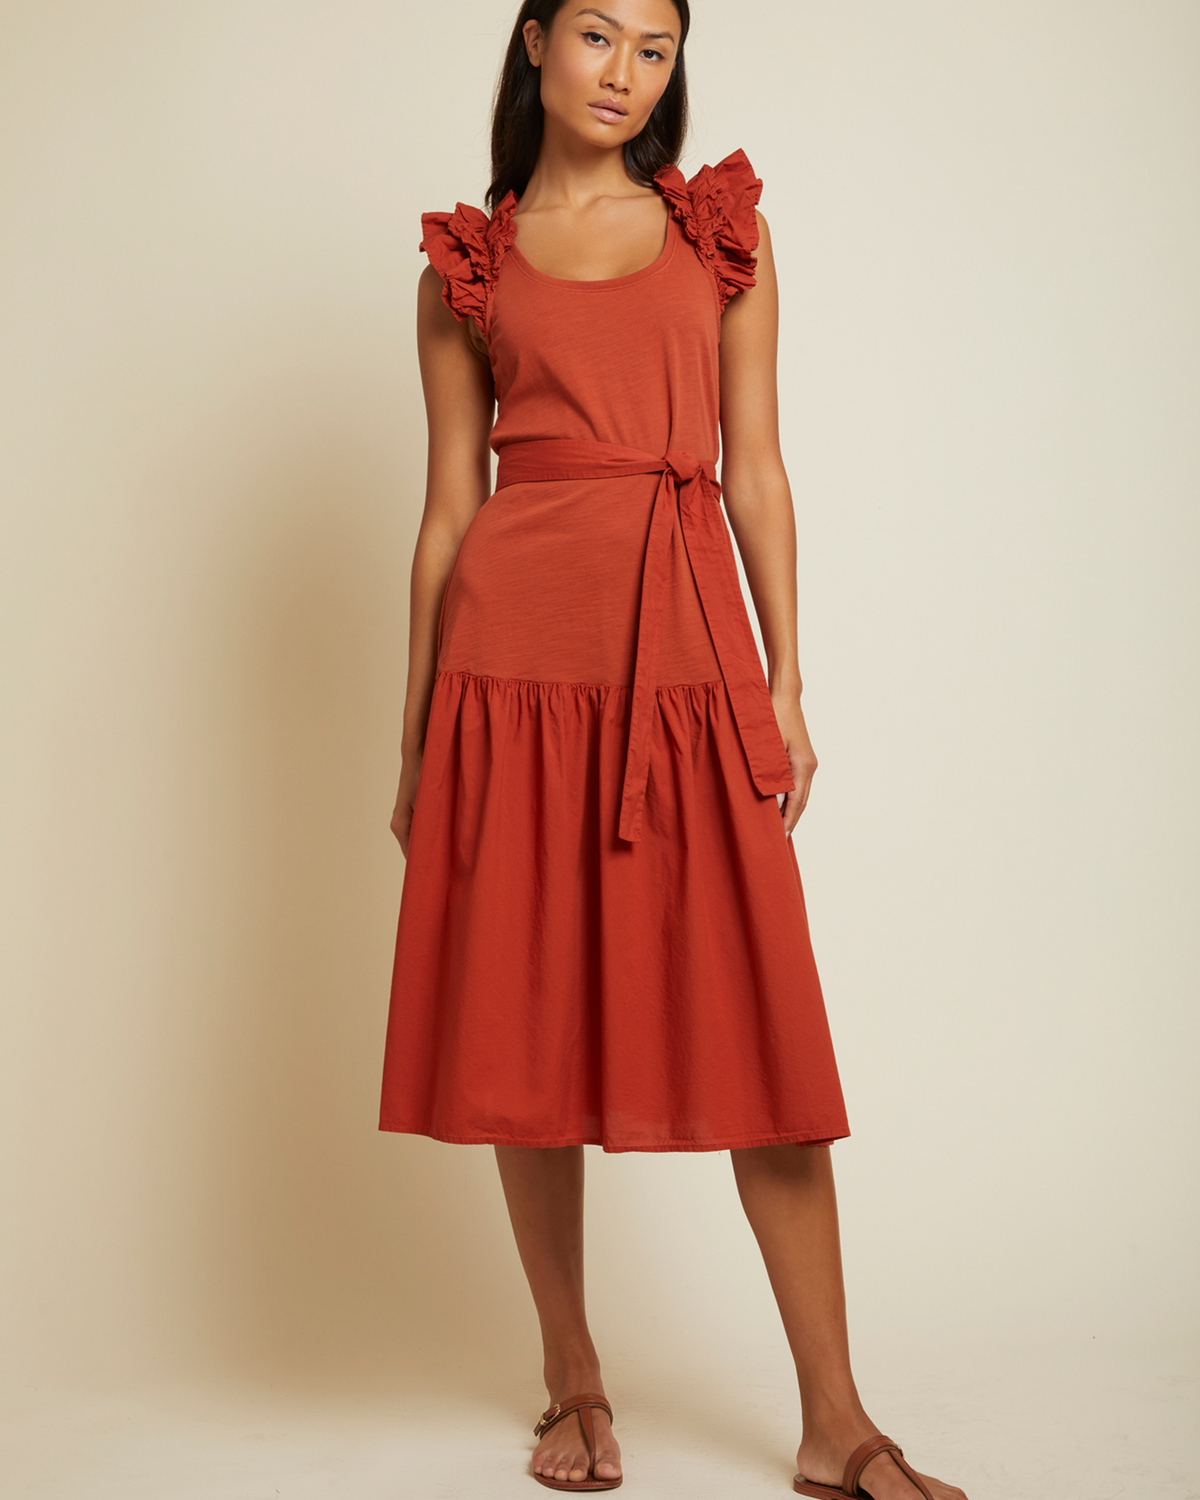 Everleigh Frilly Dress in Cayenne